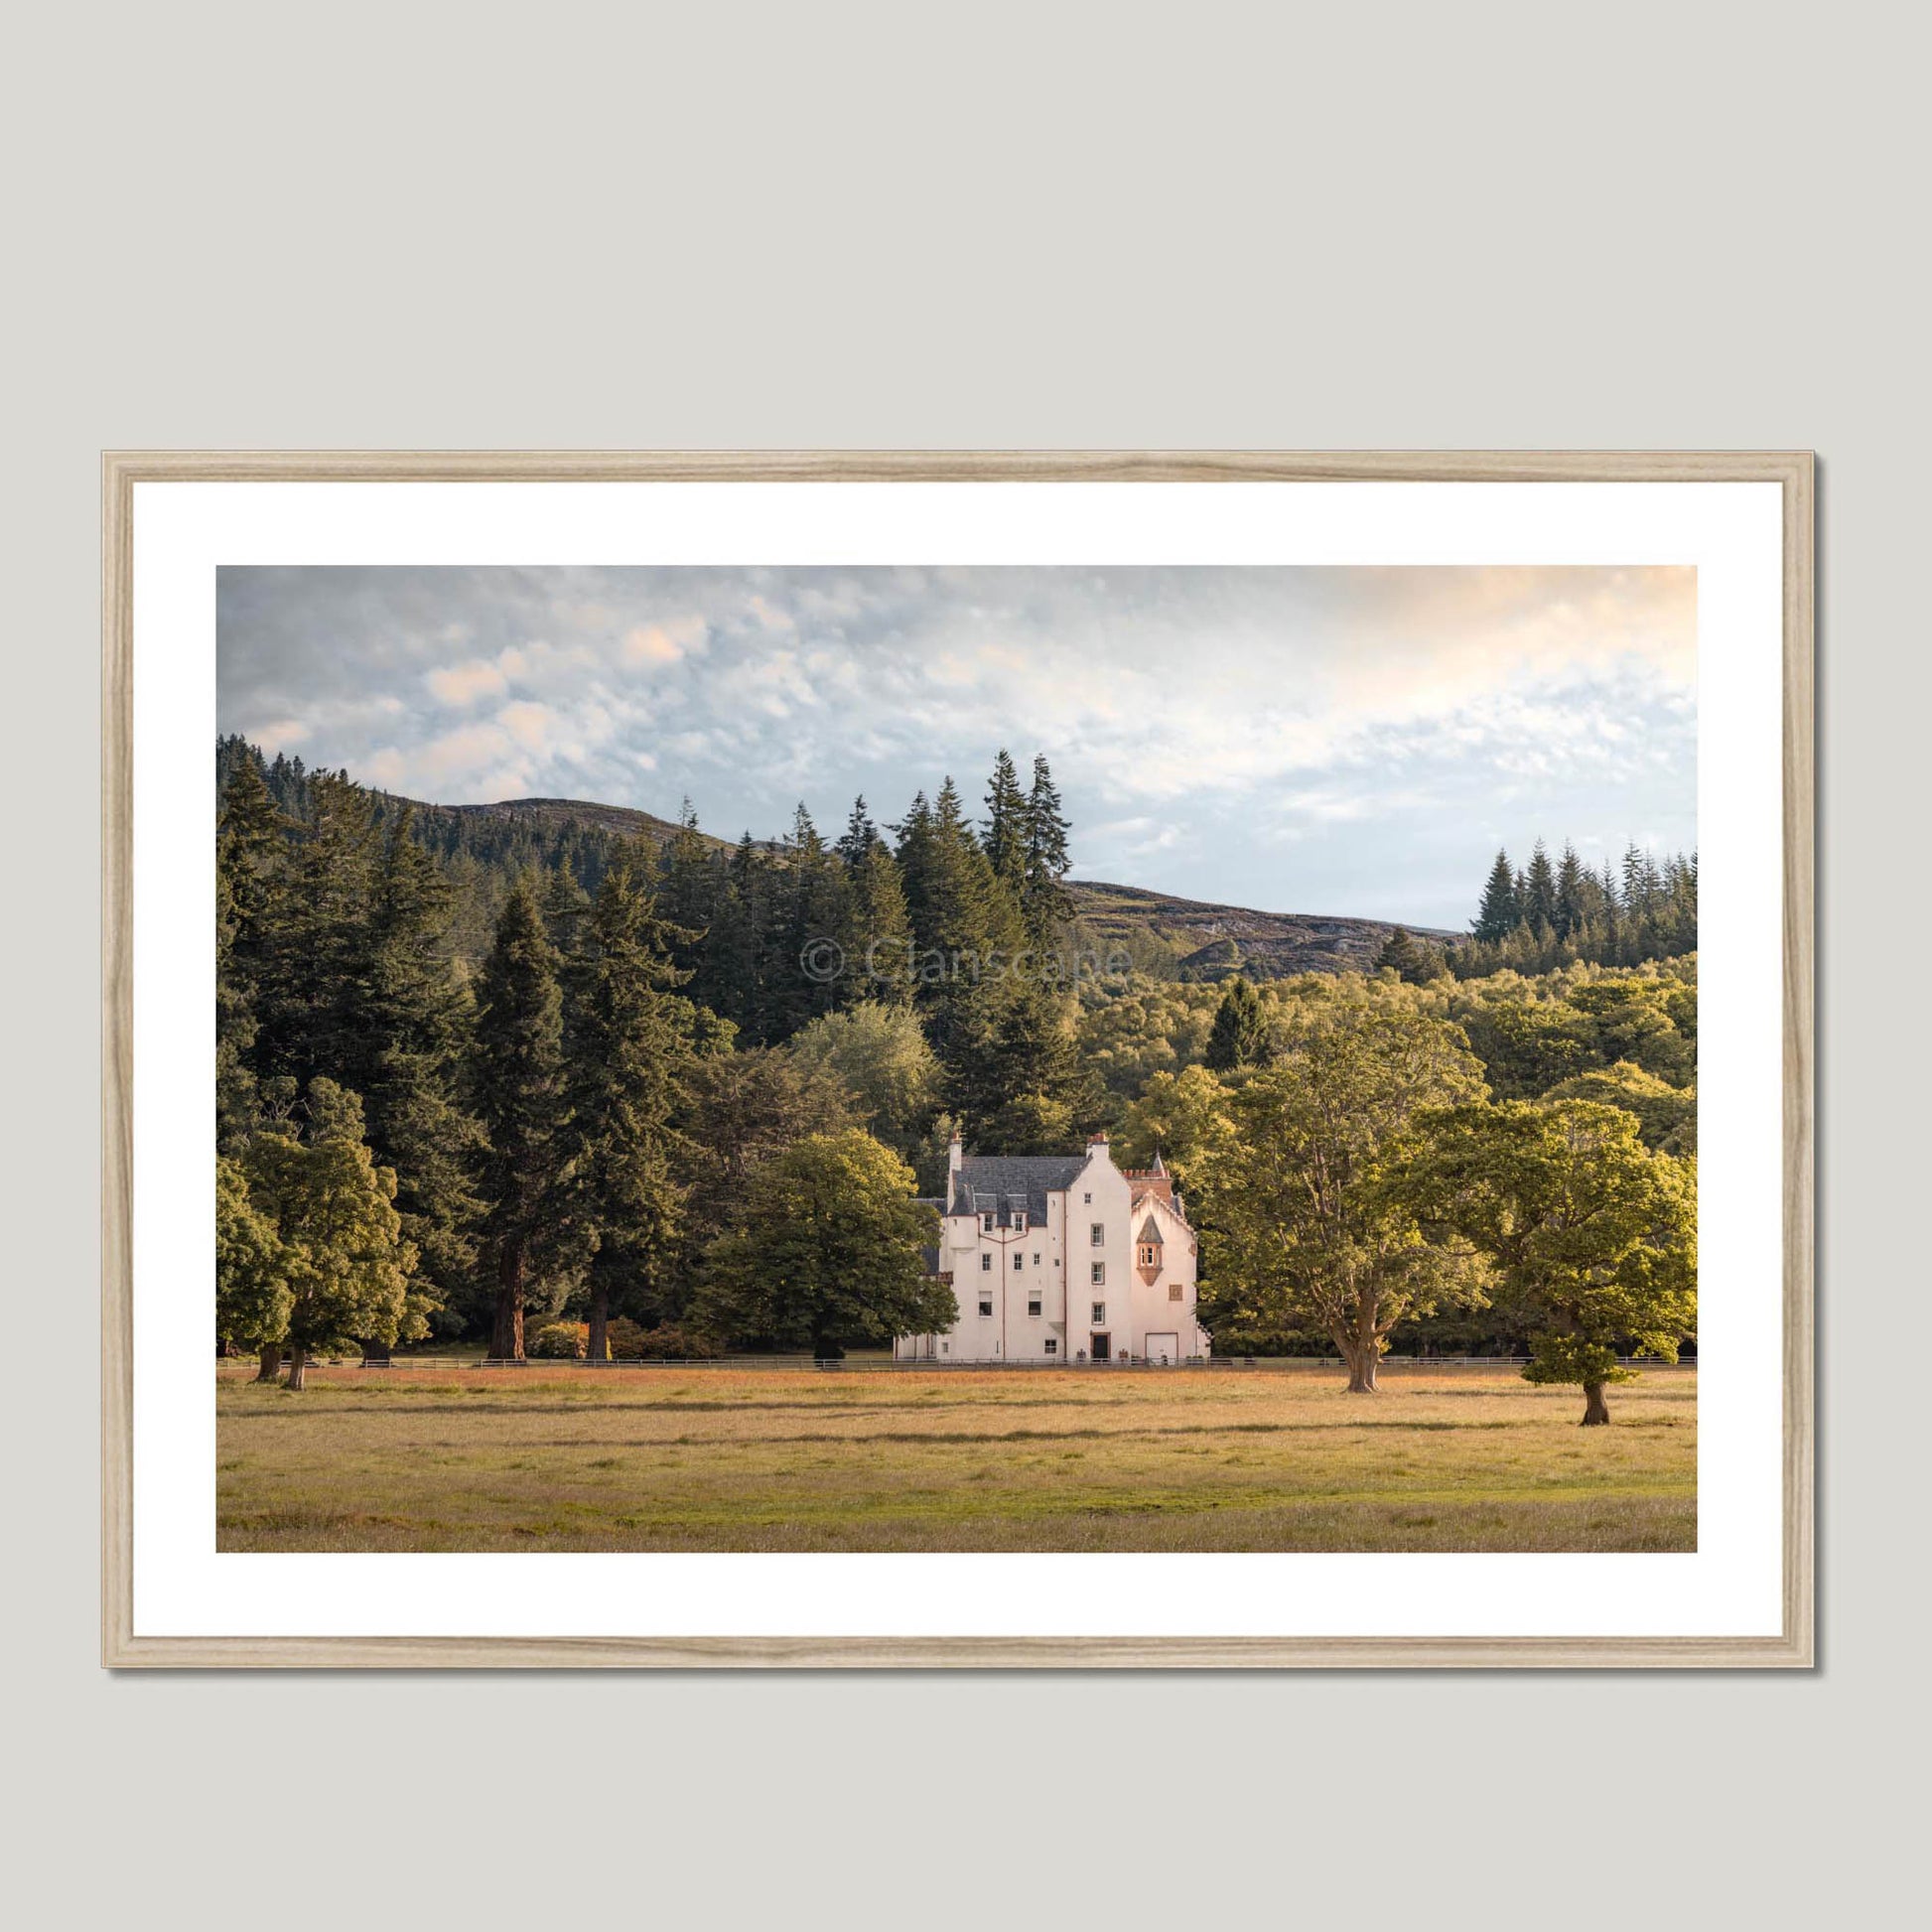 Clan Chisholm - Erchless Castle - Framed & Mounted Photo Print 40"x28" Natural